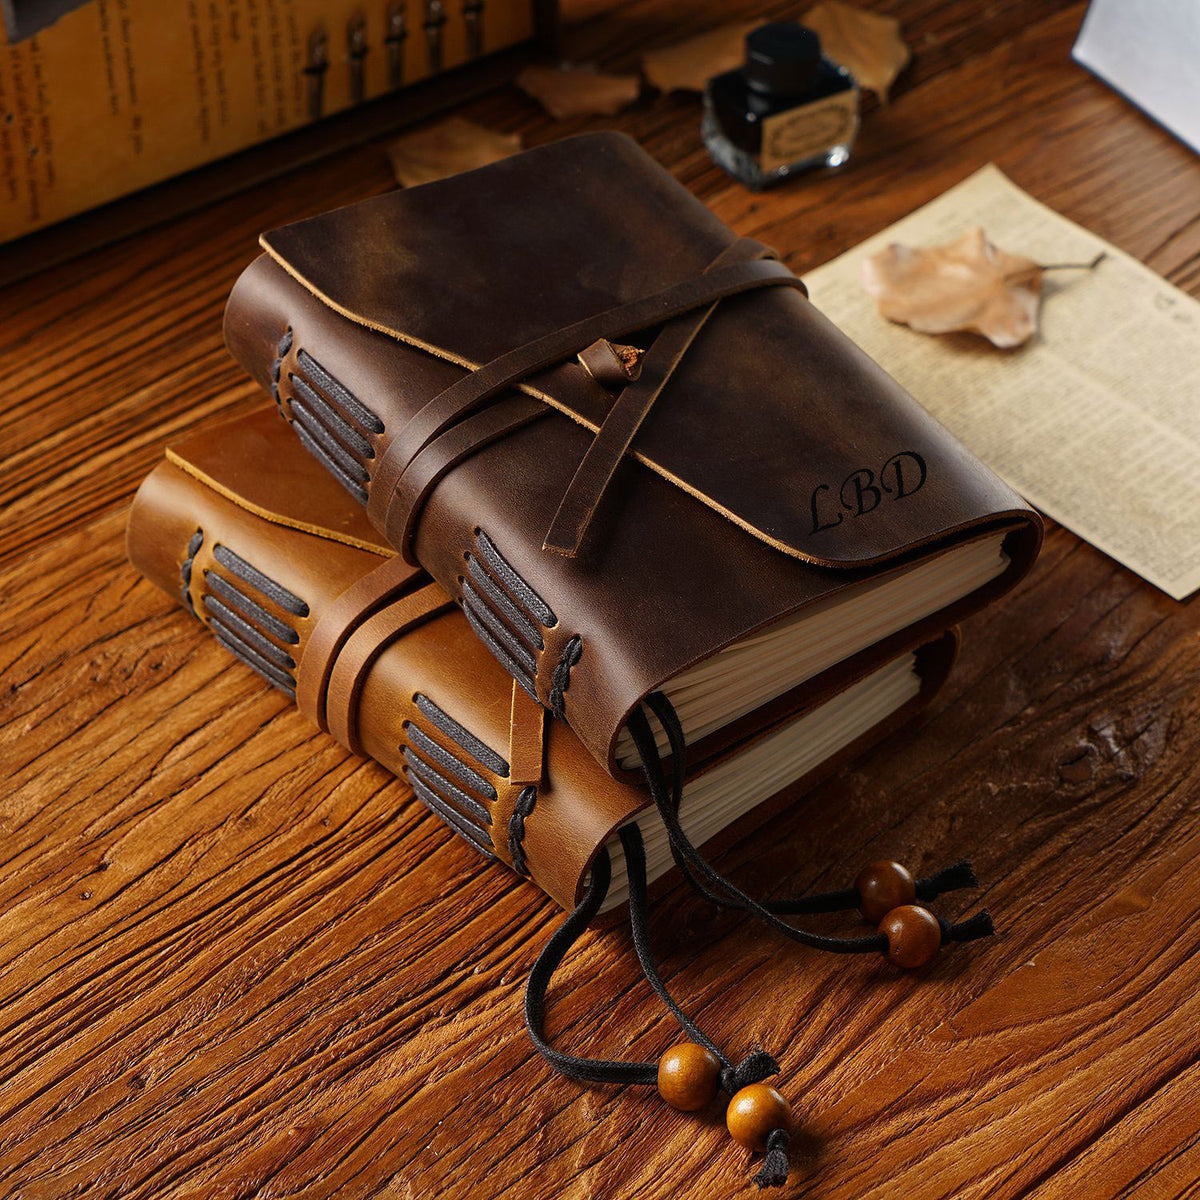  Leather Journal, Leather Notebook, Travel Journal for